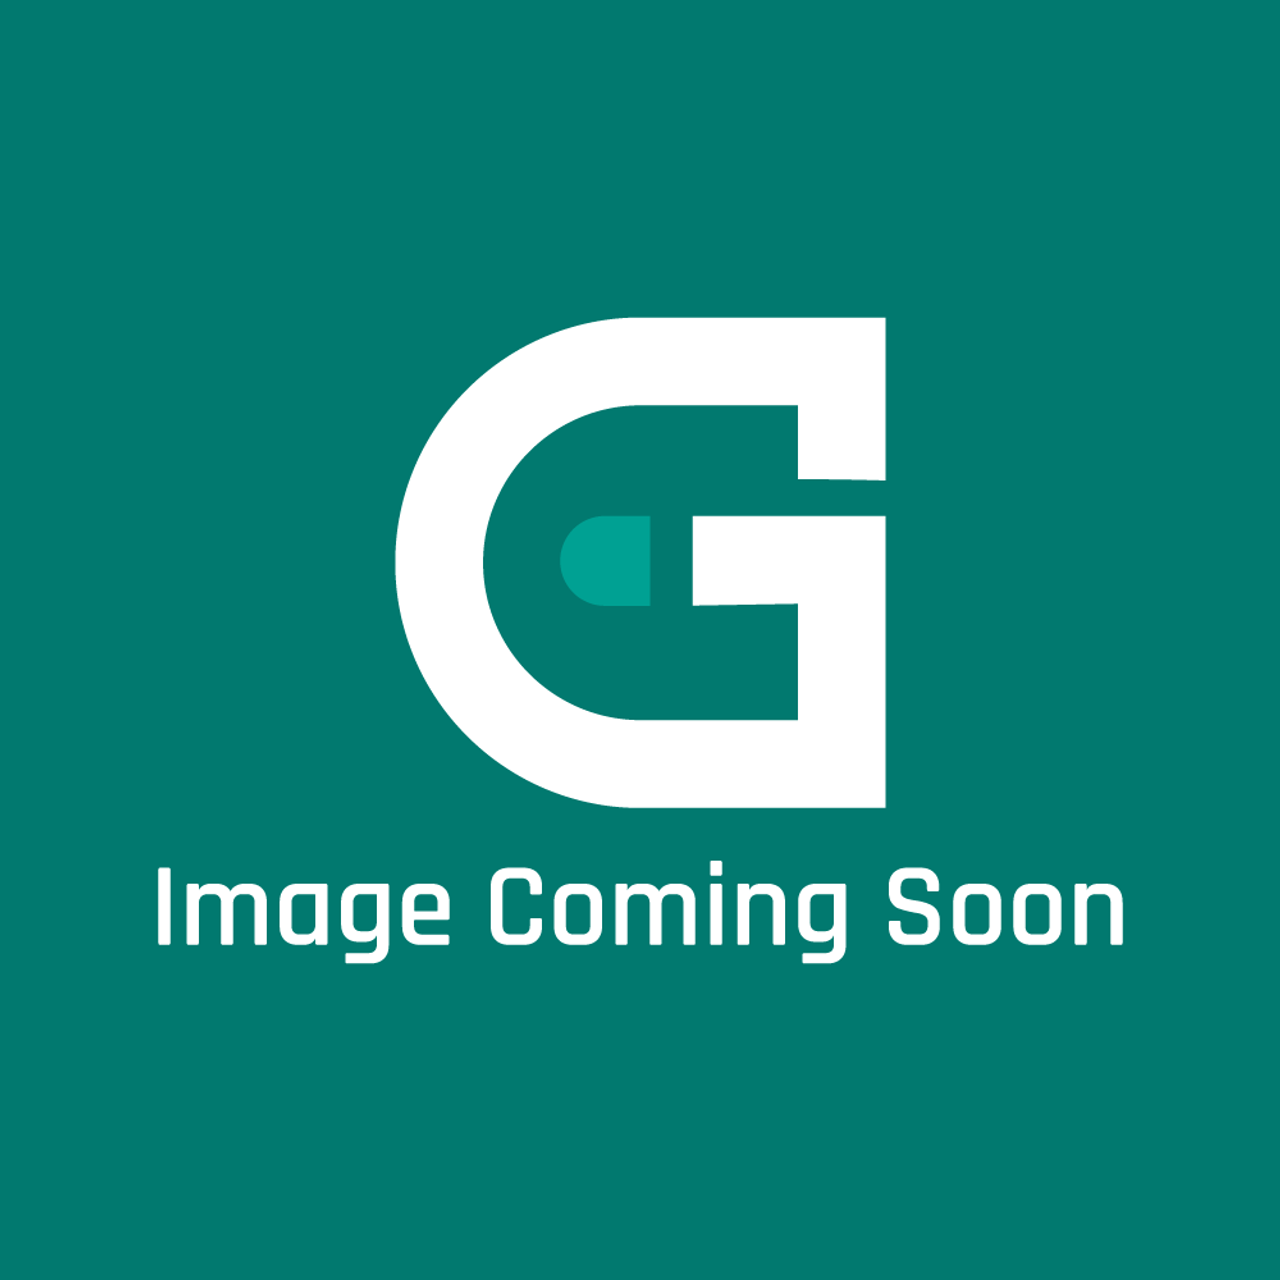 GE Appliances WB63K10139 - Panel Rear Broil - Image Coming Soon!